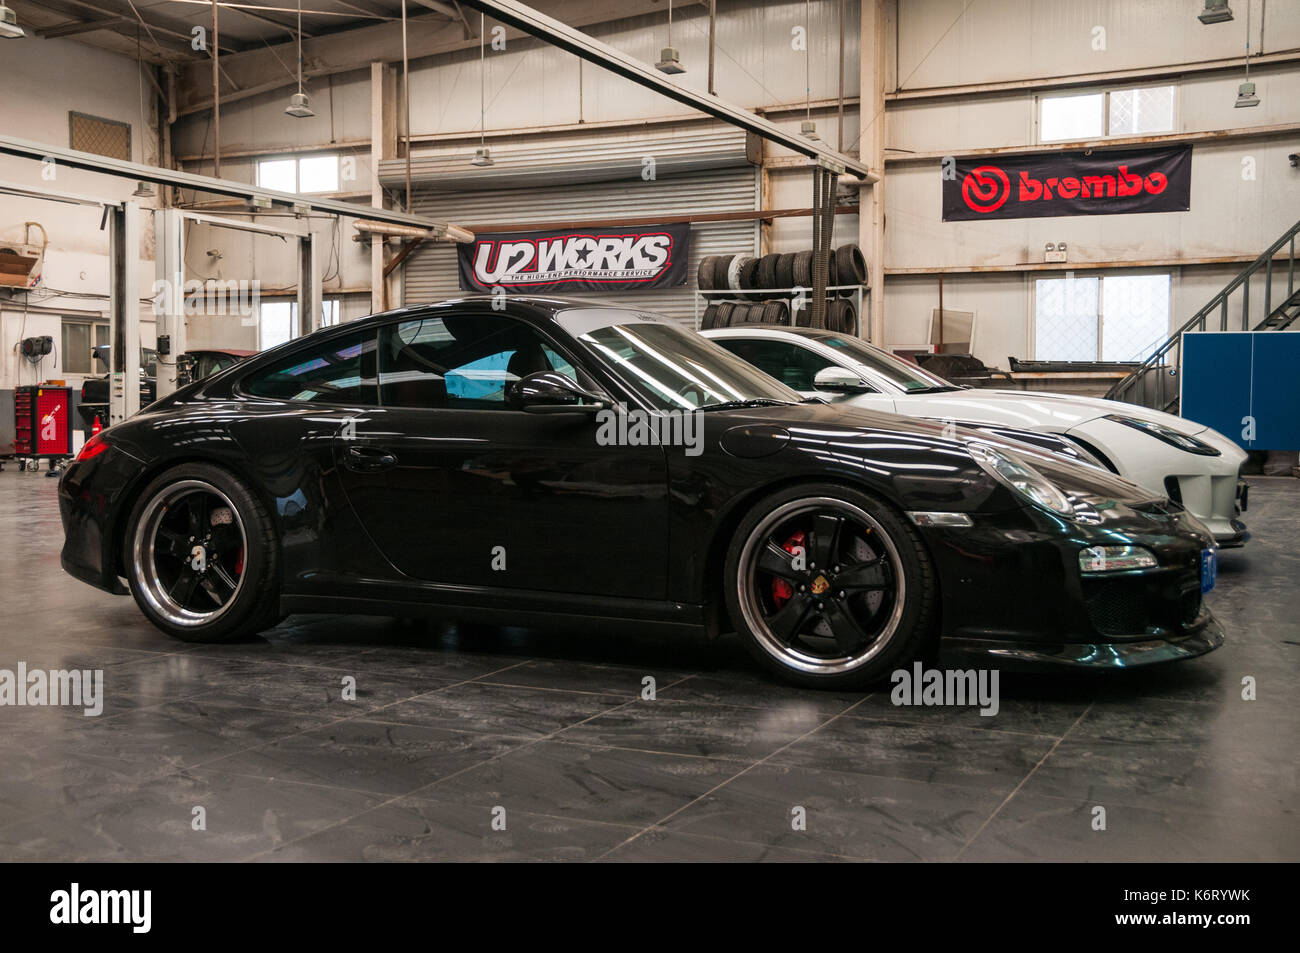 Porsche 911 and Jaguar F-type in the workshop of U2 cars in the Fengyiqiao area of Beijing. Stock Photo